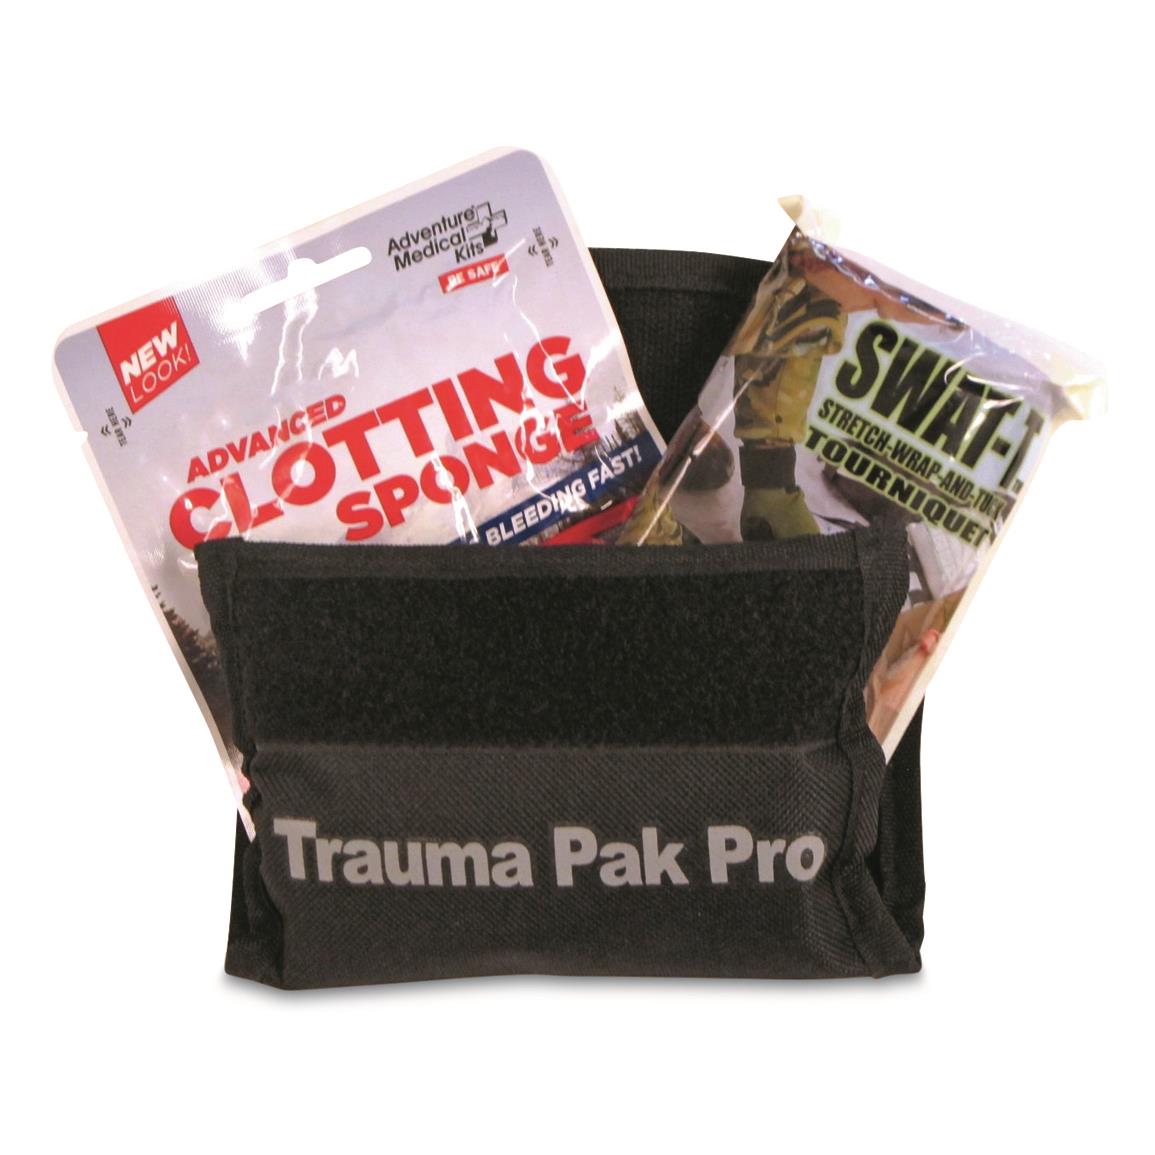 Adventure Medical Kits Trauma Pack Pro with QuikClot & Swat